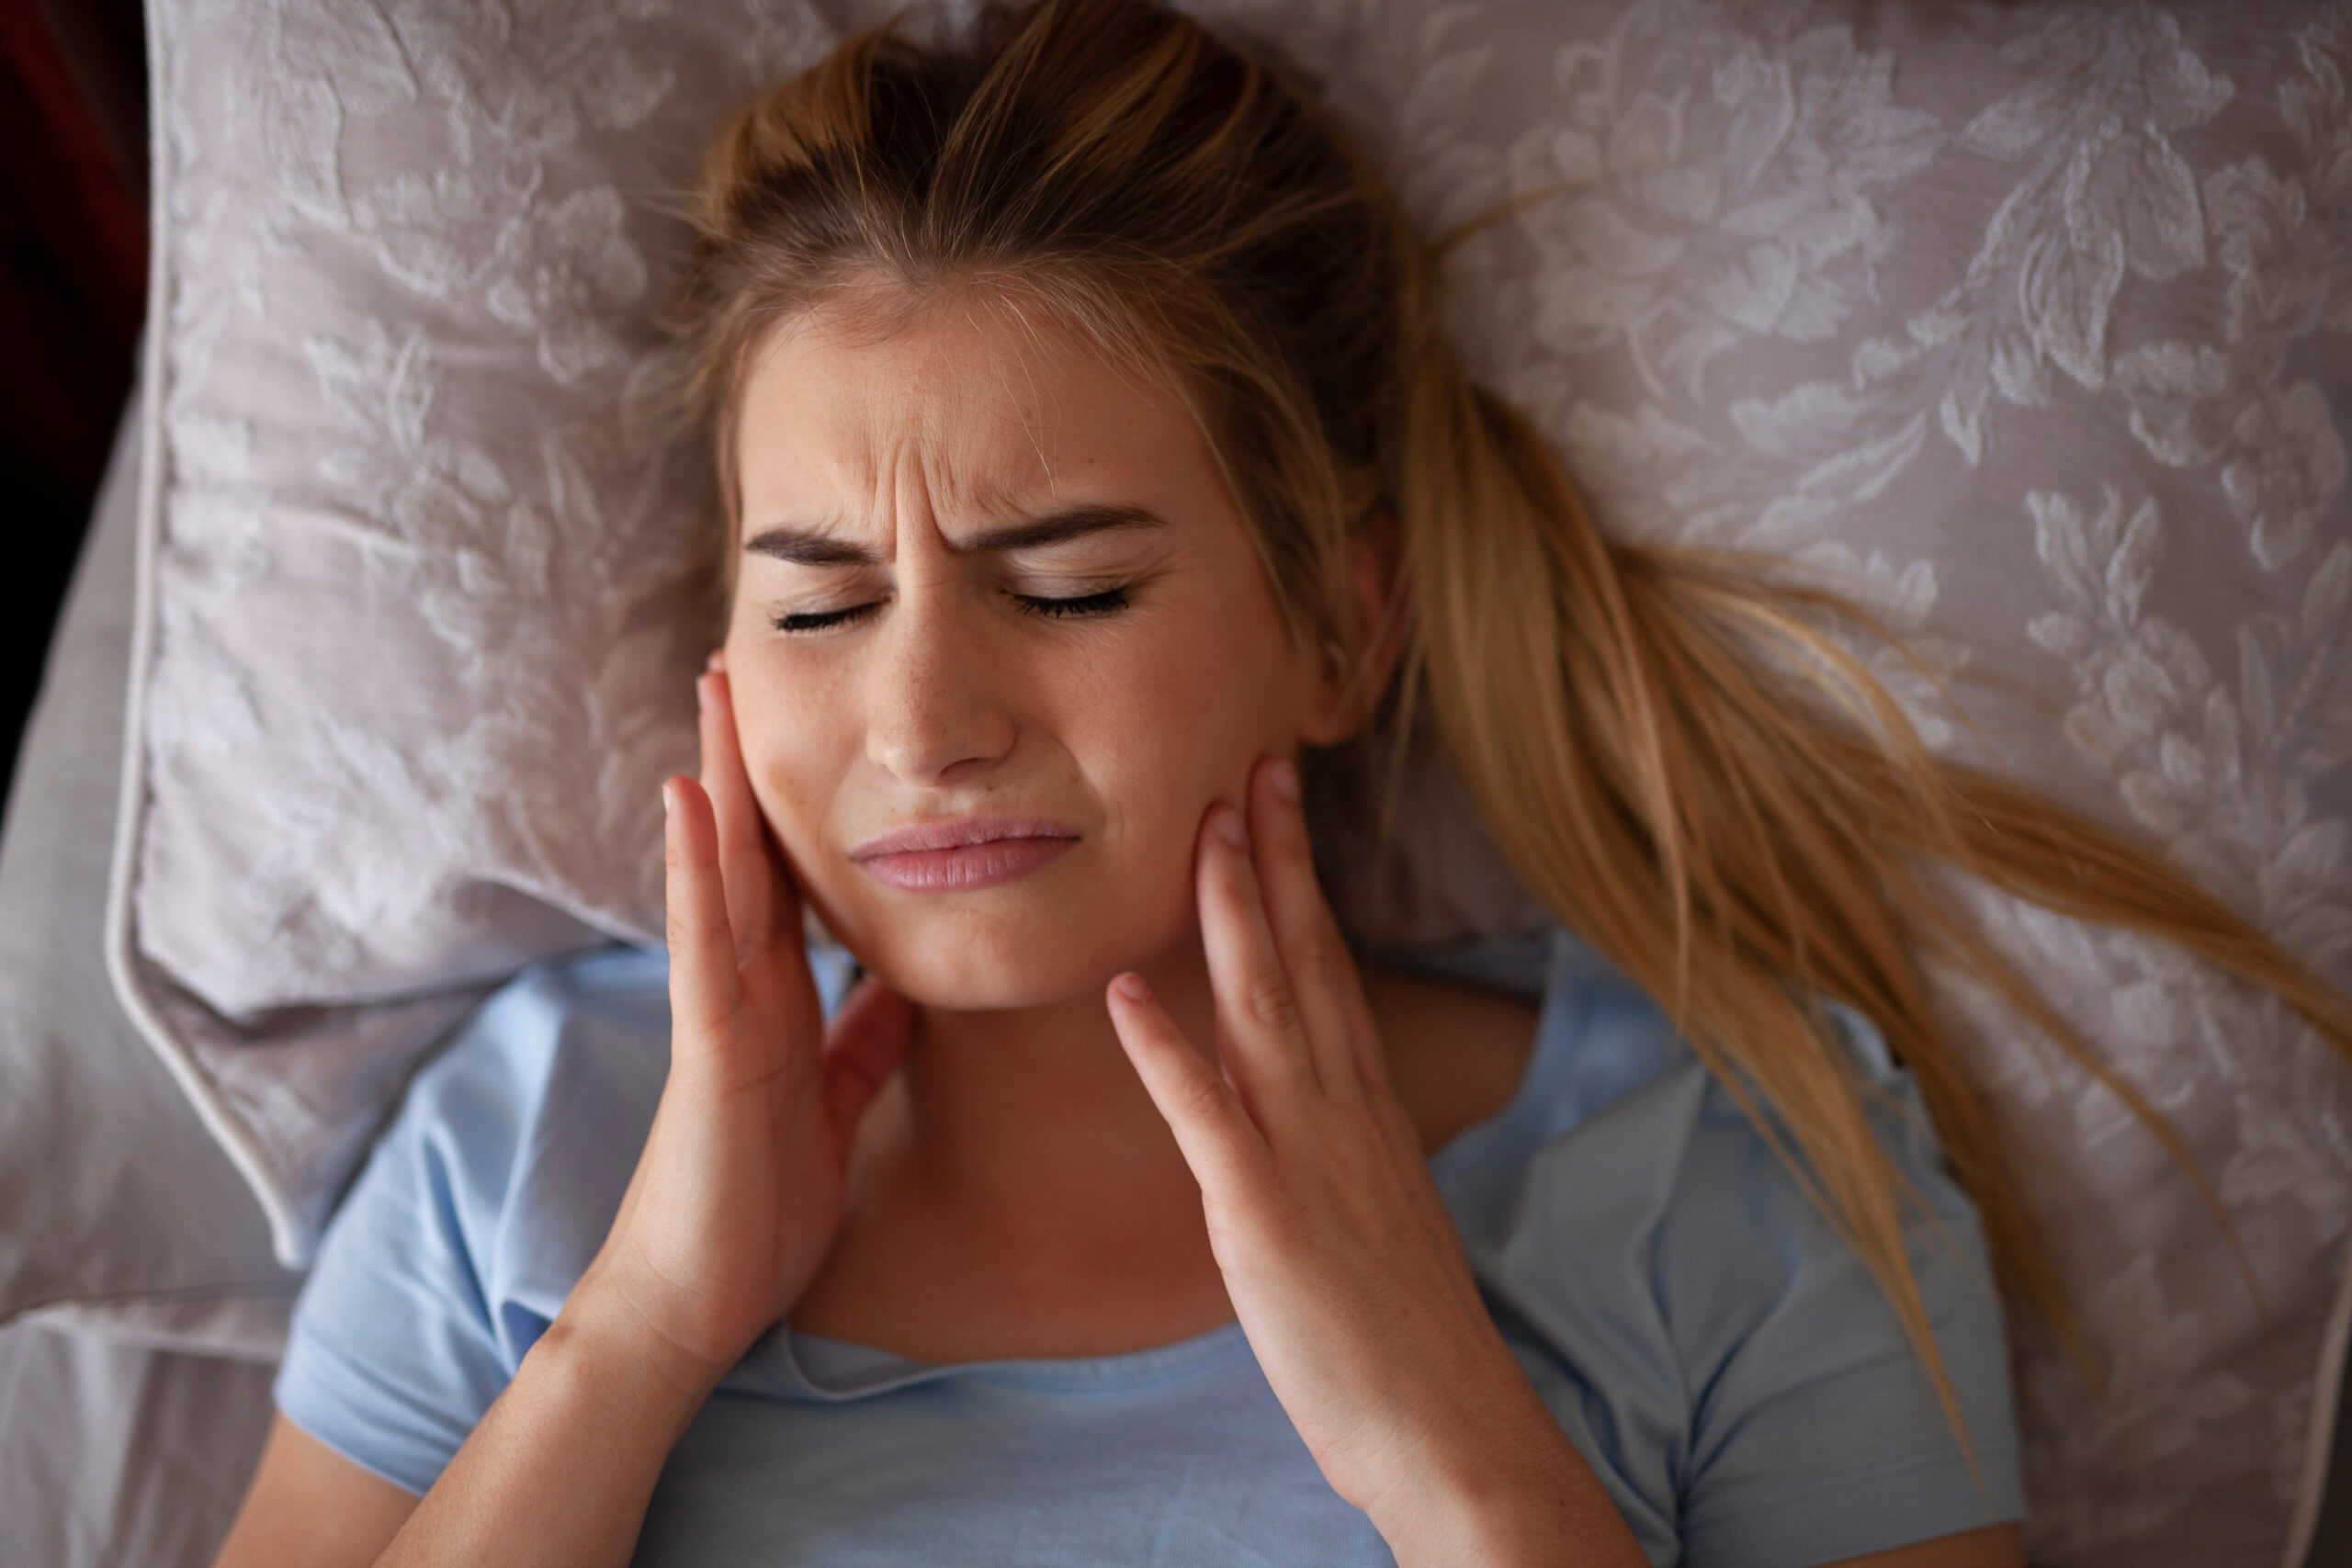 Teeth Grinding at Night: Signs, Effects, and Treatment